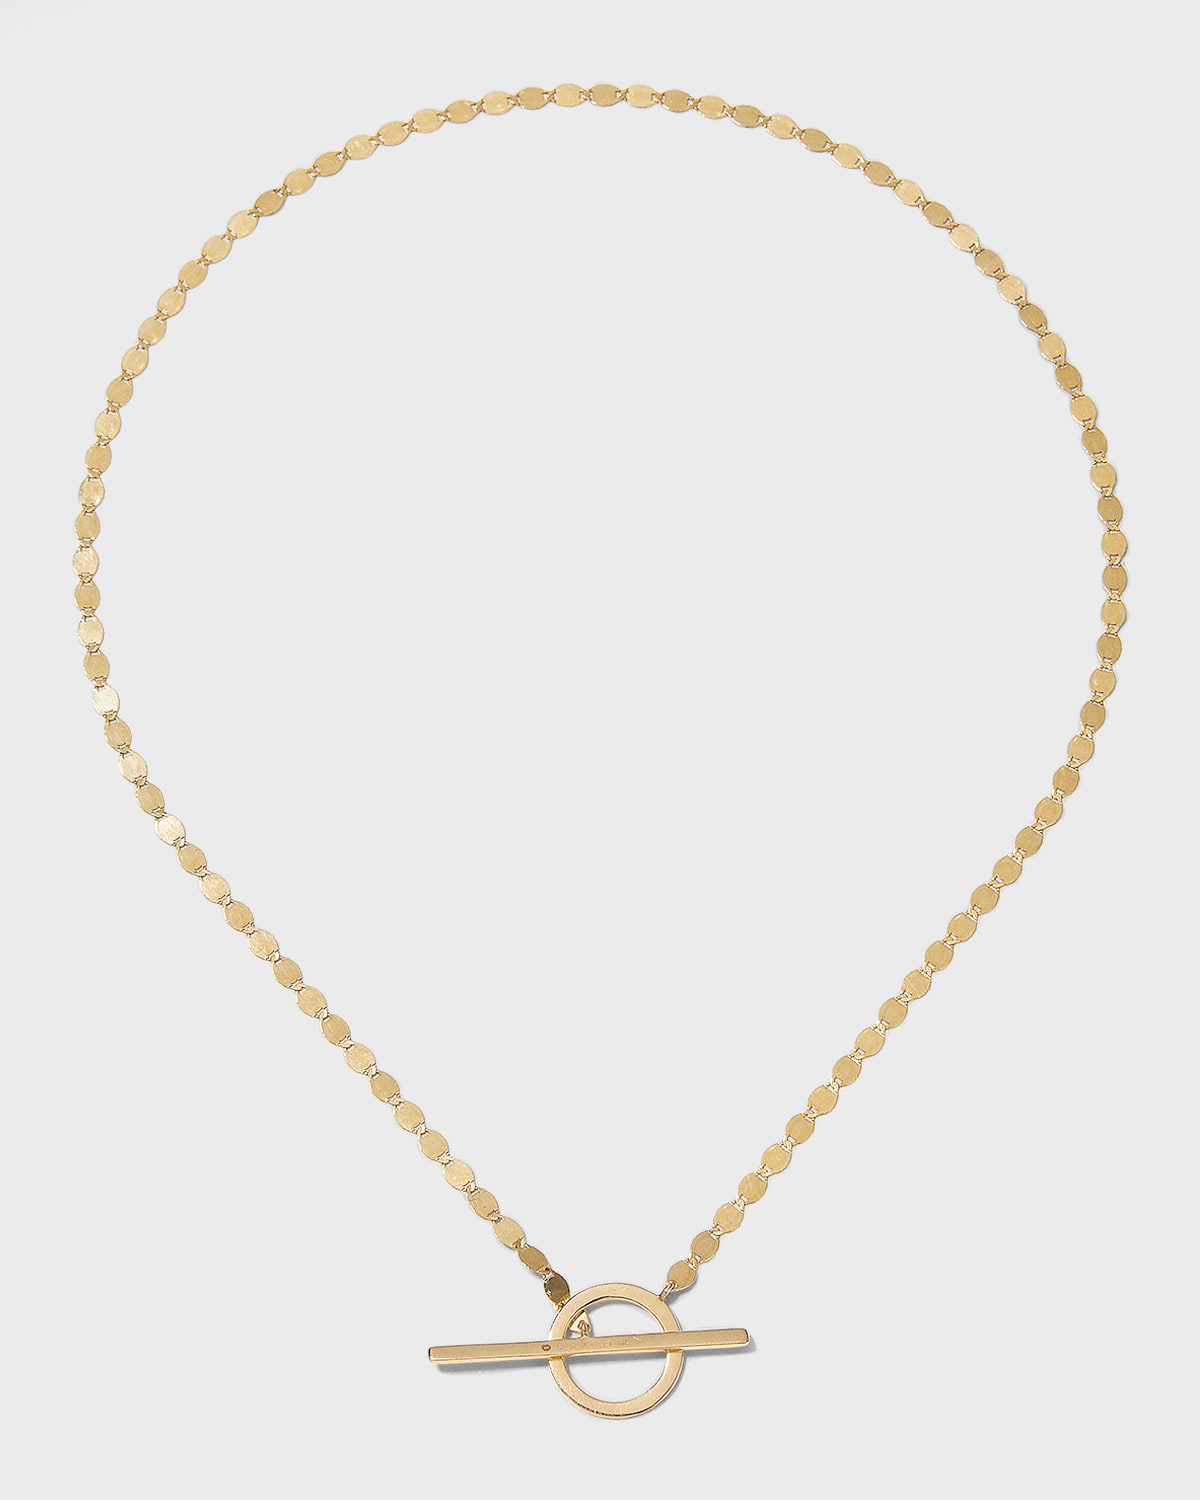 Lana Toggle Nude Chain Necklace